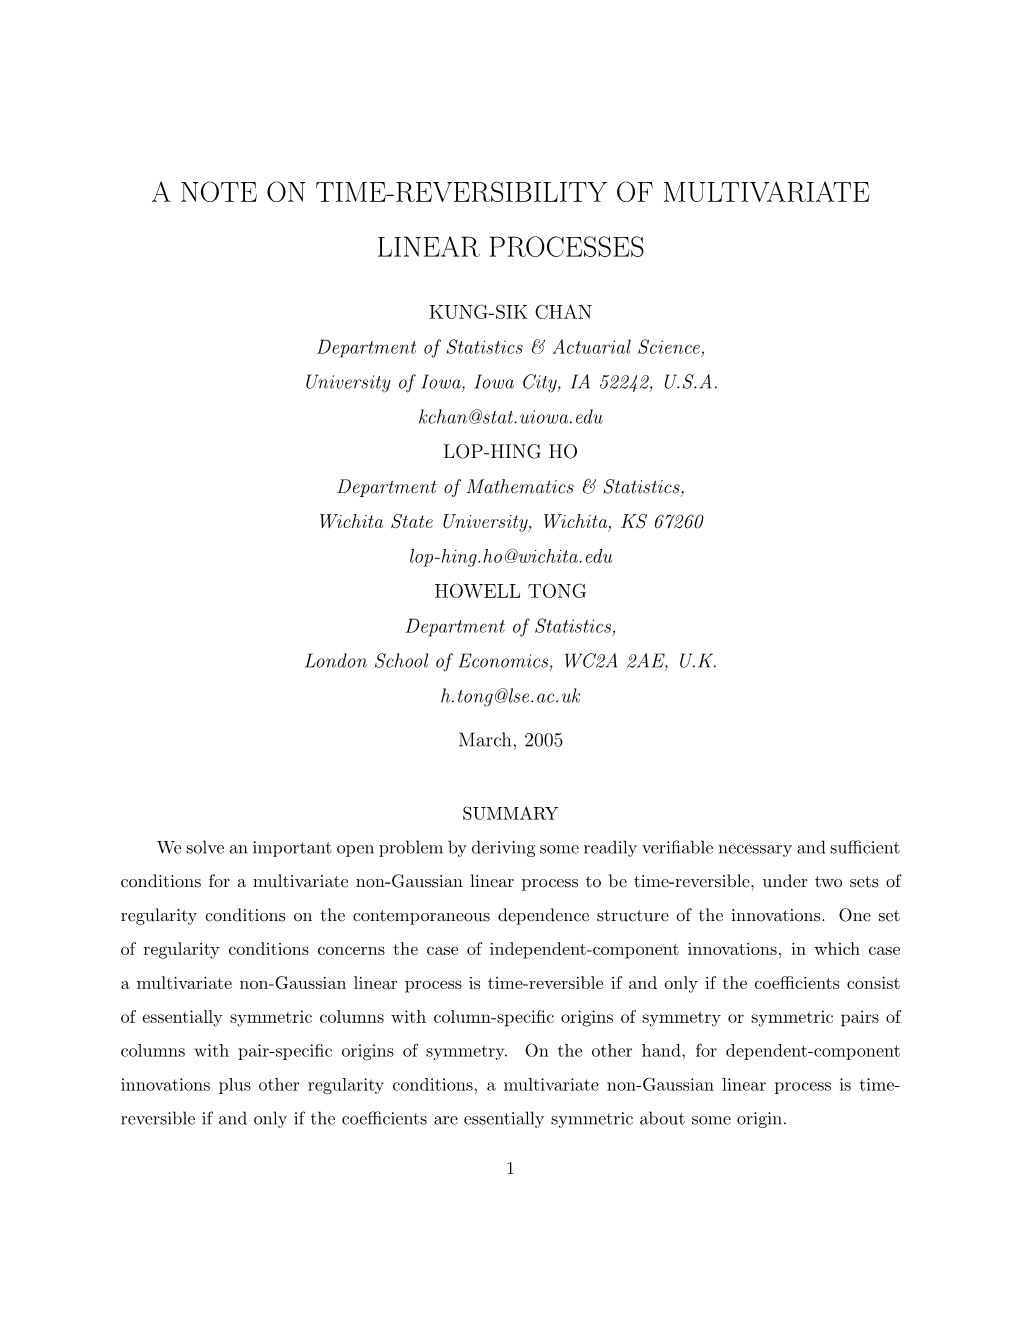 A Note on Time-Reversibility of Multivariate Linear Processes